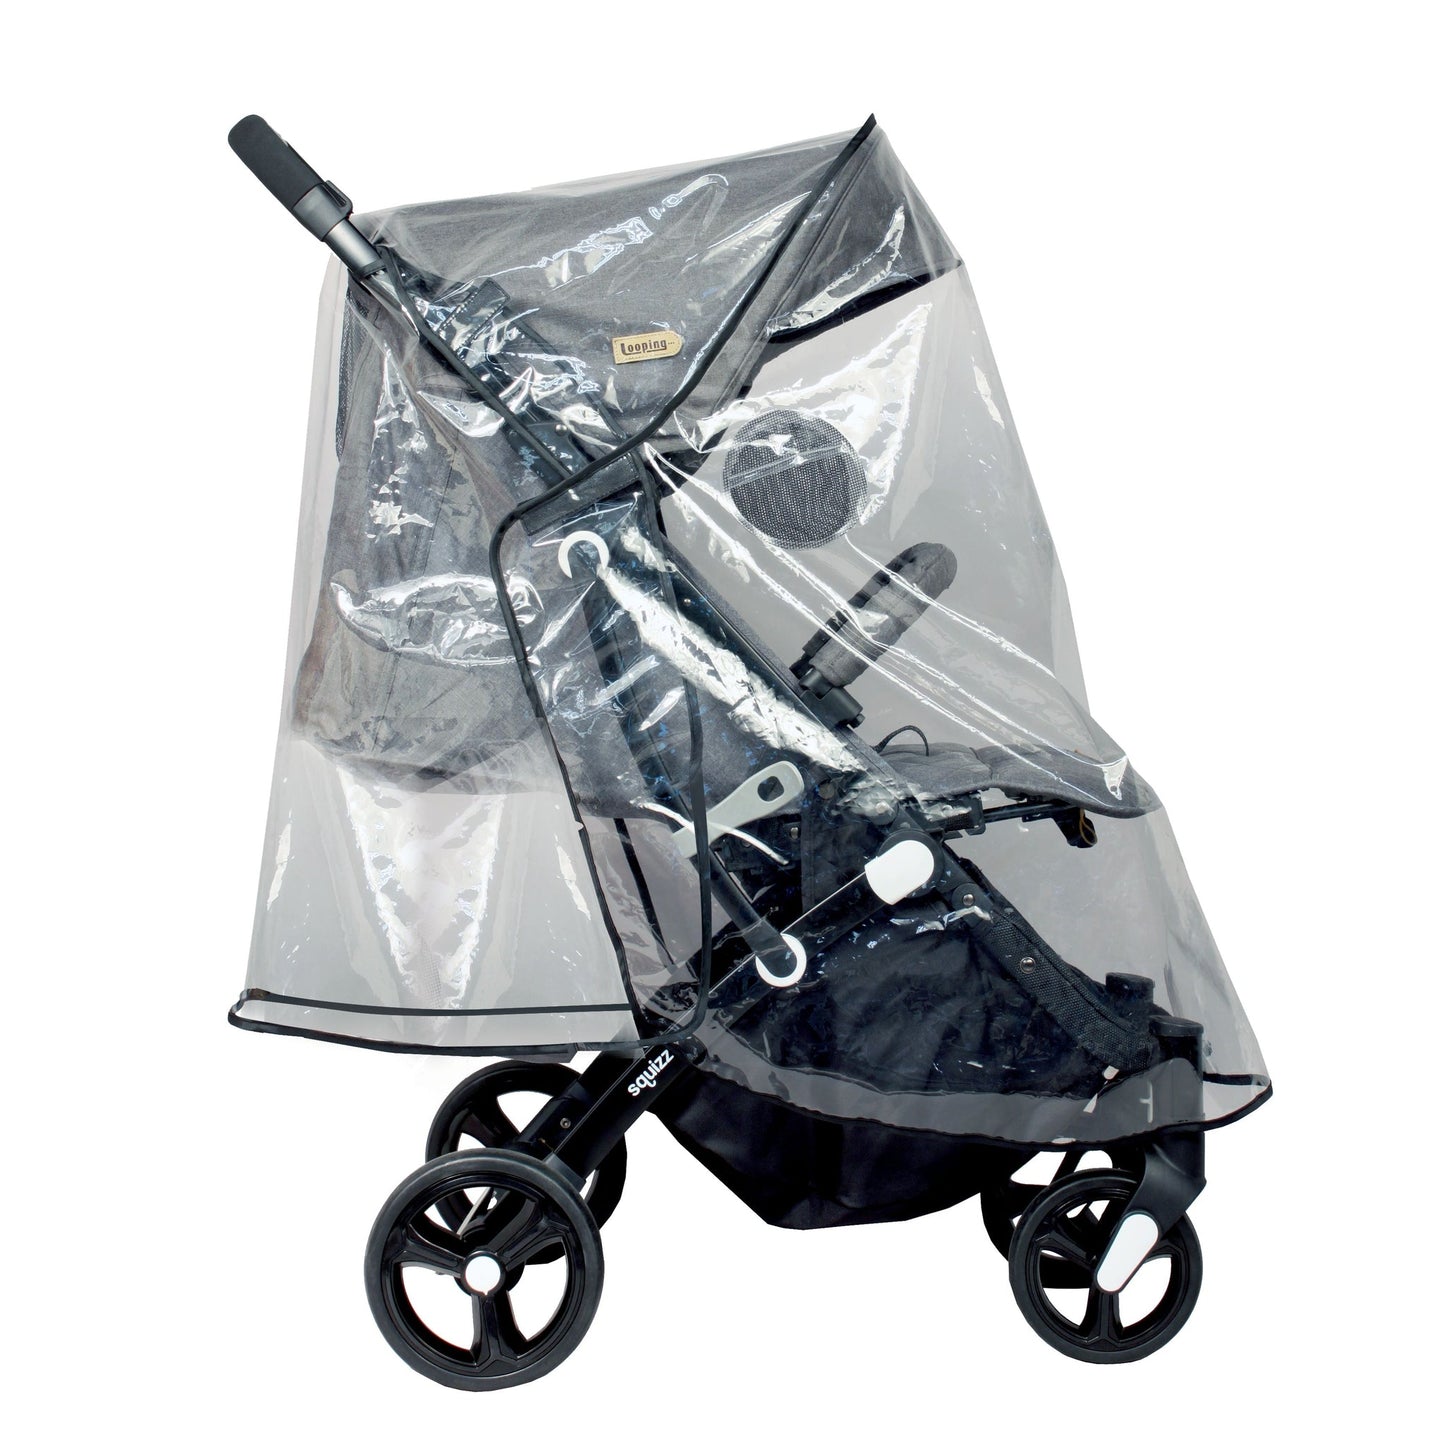 Looping Squizz and Sydney Stroller Raincover